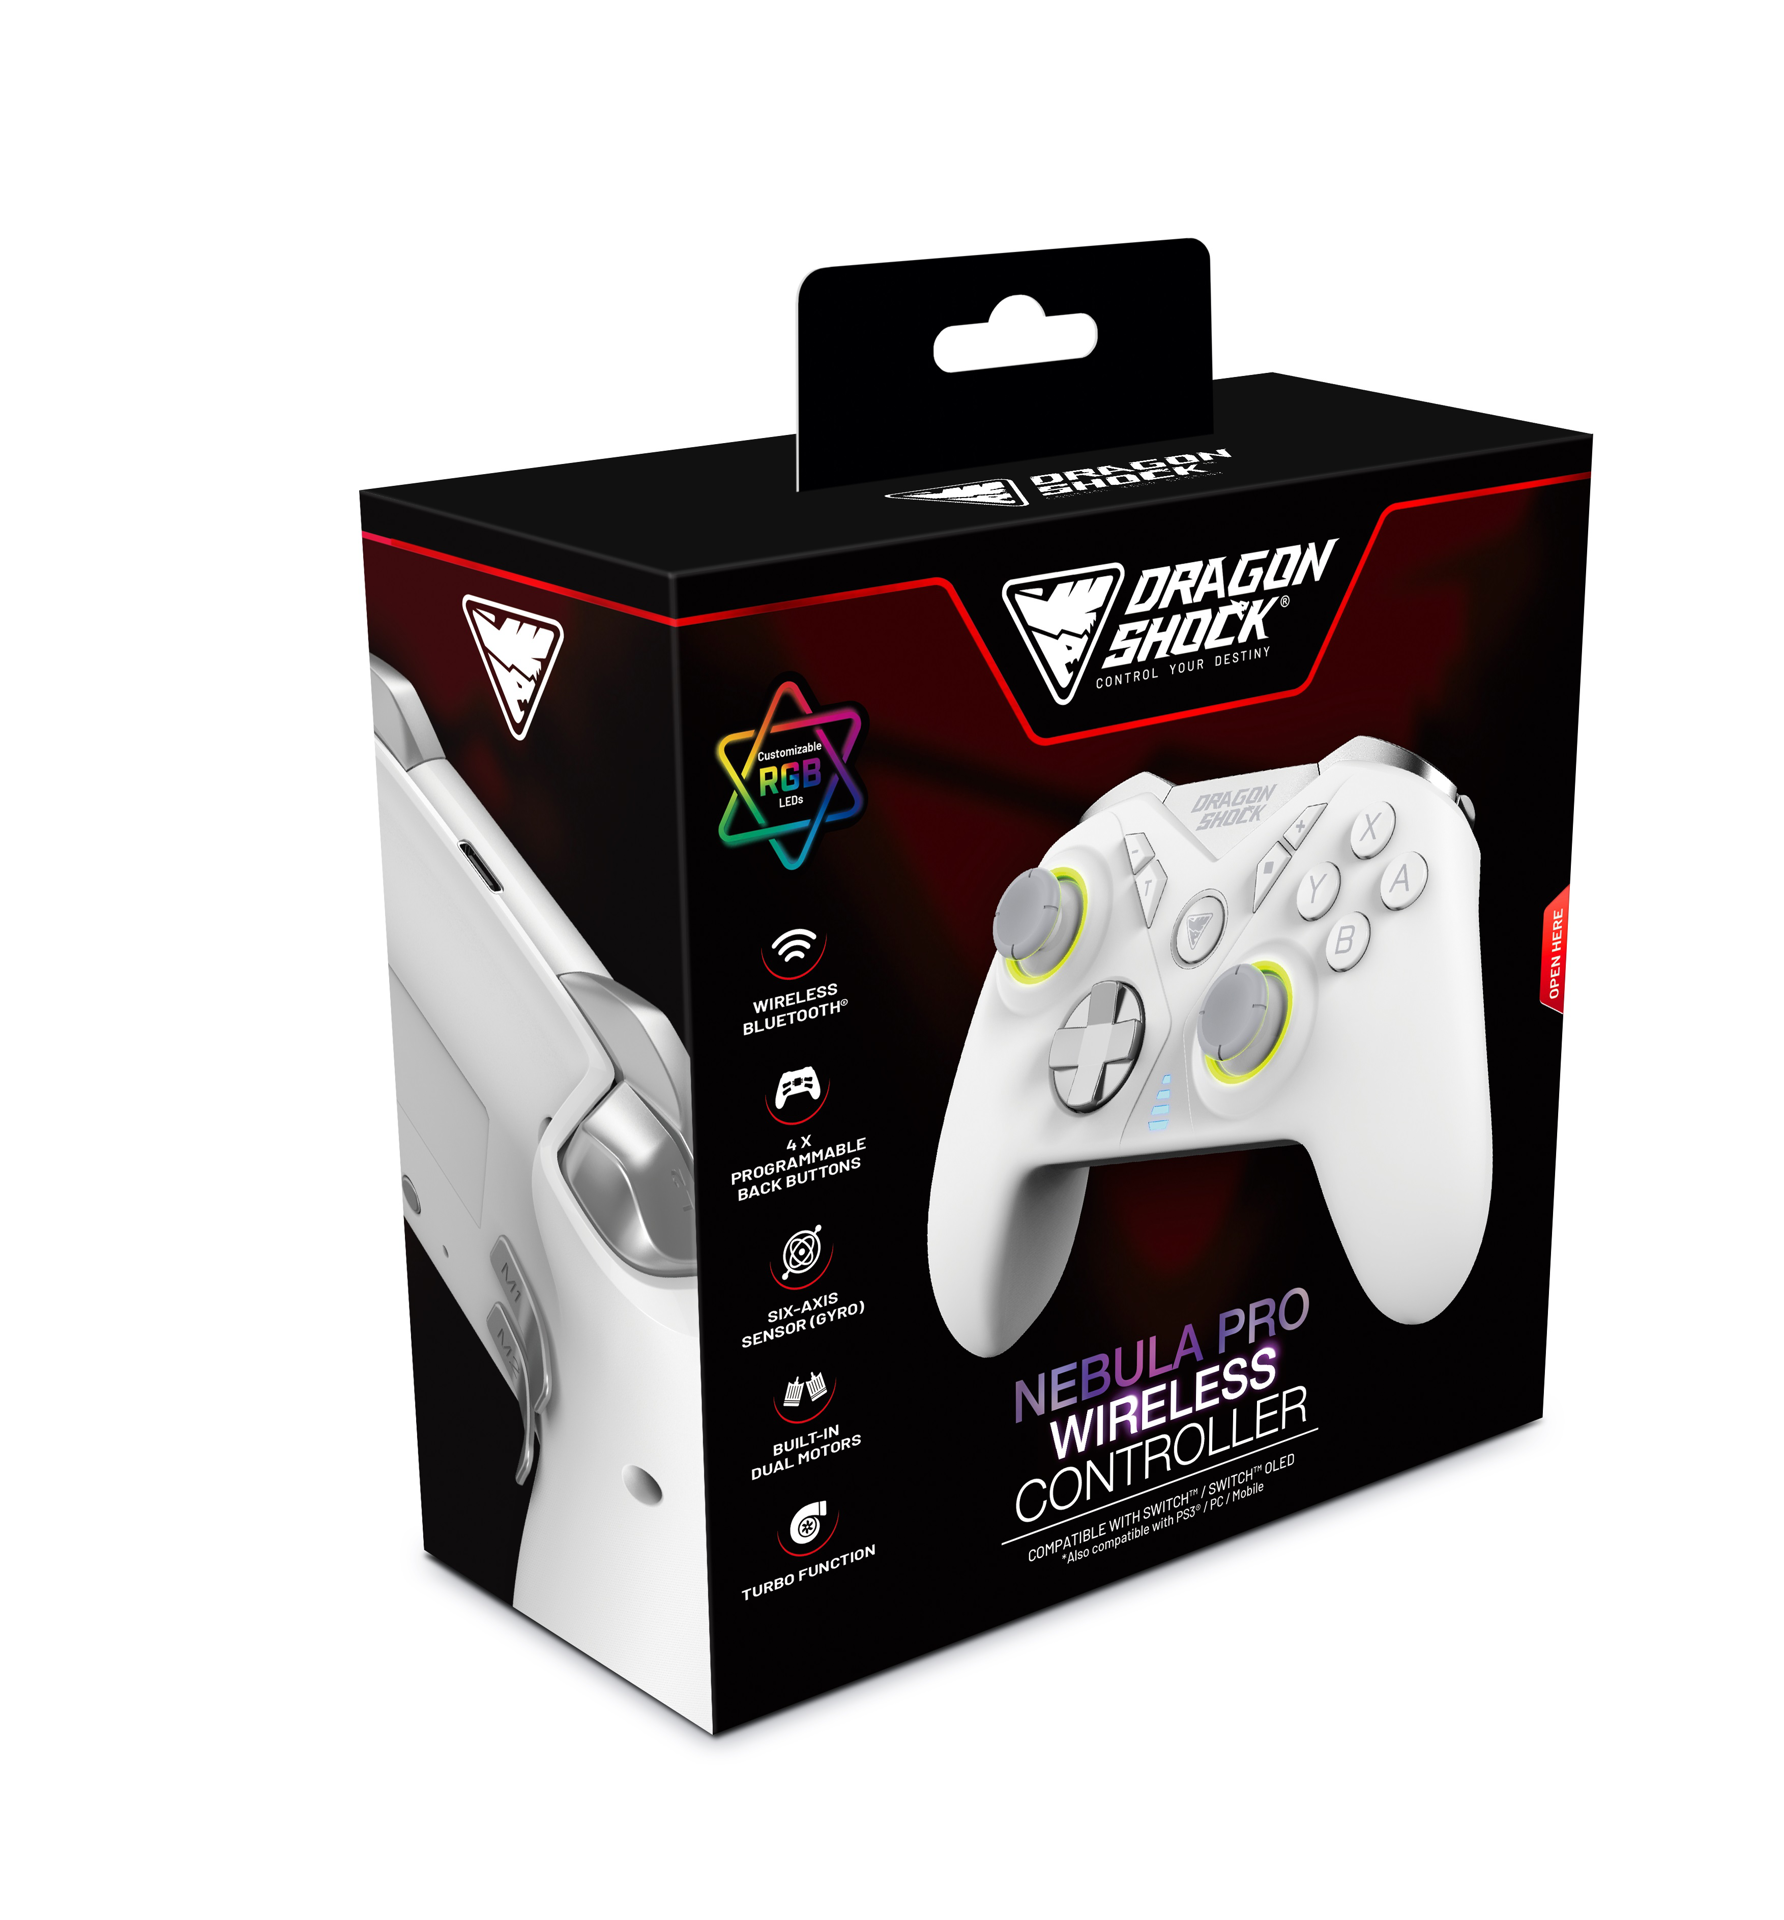 DragonShock - NEBULA PRO - Manette sans fil Pro Blanche pour Nintendo Switch, Switch Lite, Switch OLED, PS3, PC et Android